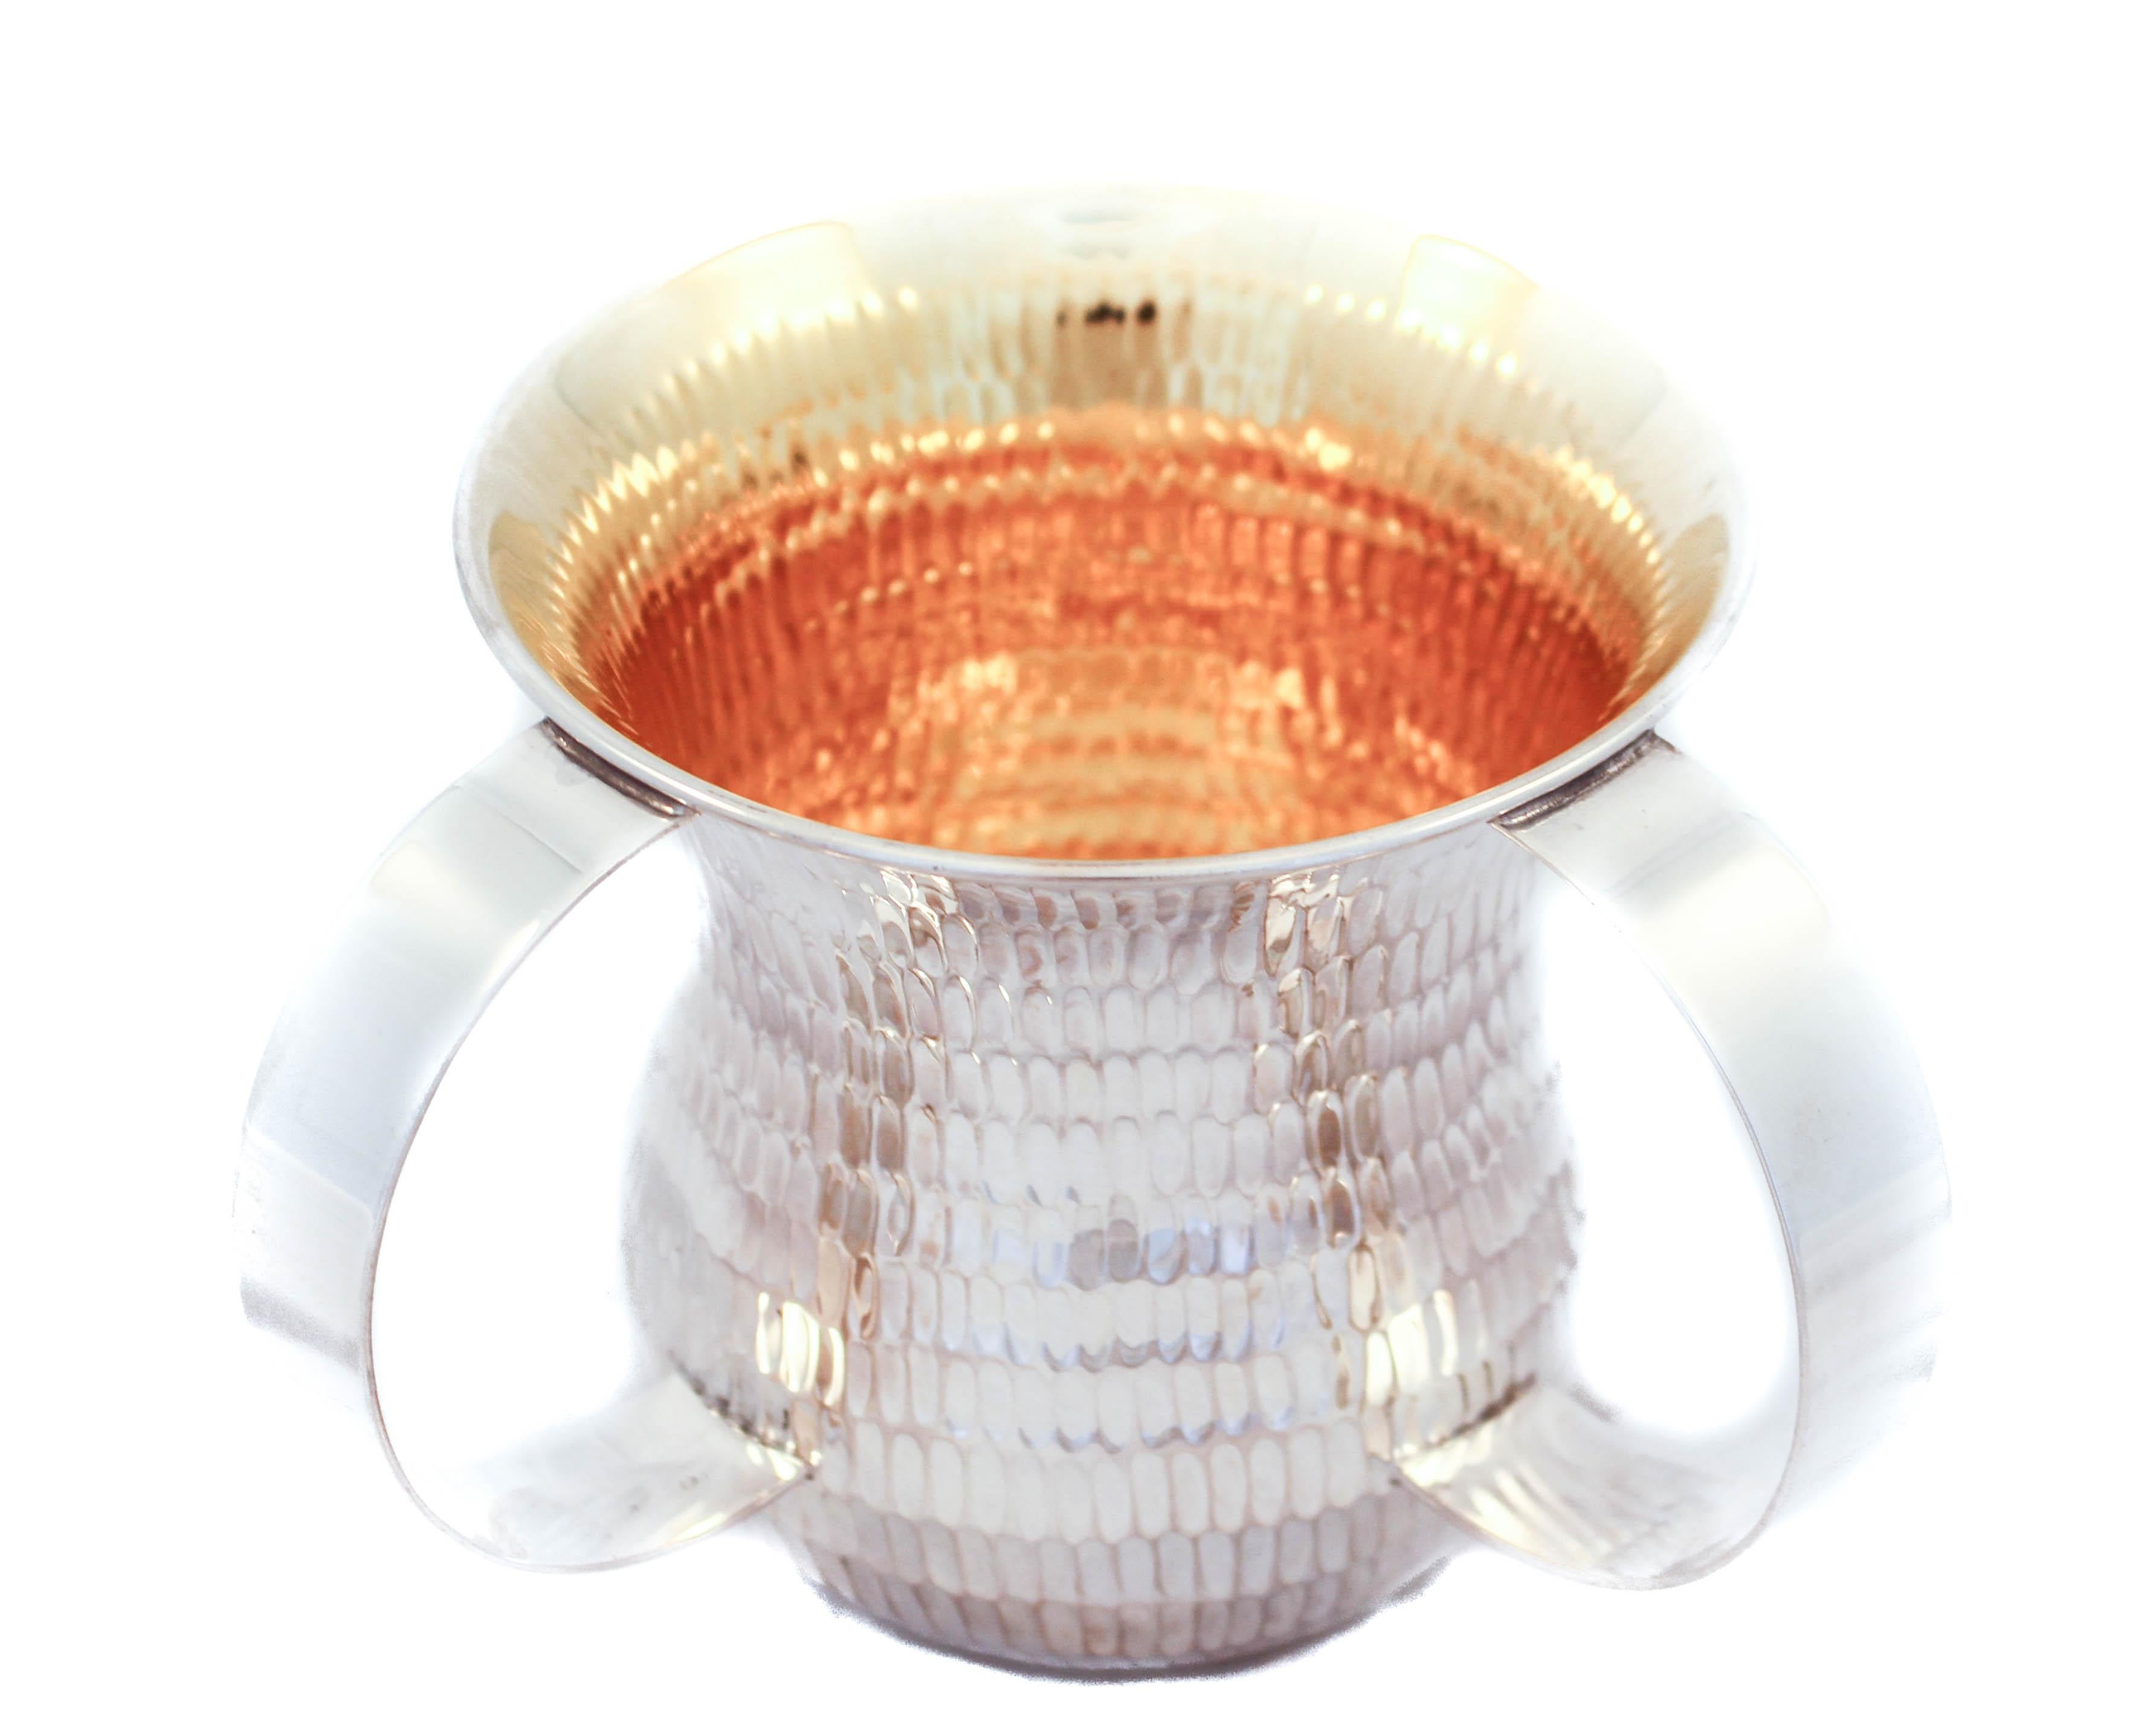 Being offered is a sterling silver washing cup (N’tillat Yadaiyim cup). This item is used to wash ones hands either before eating bread or performing religious requirements in the Jewish faith. 
It has a modern shape and design. Notice the curved